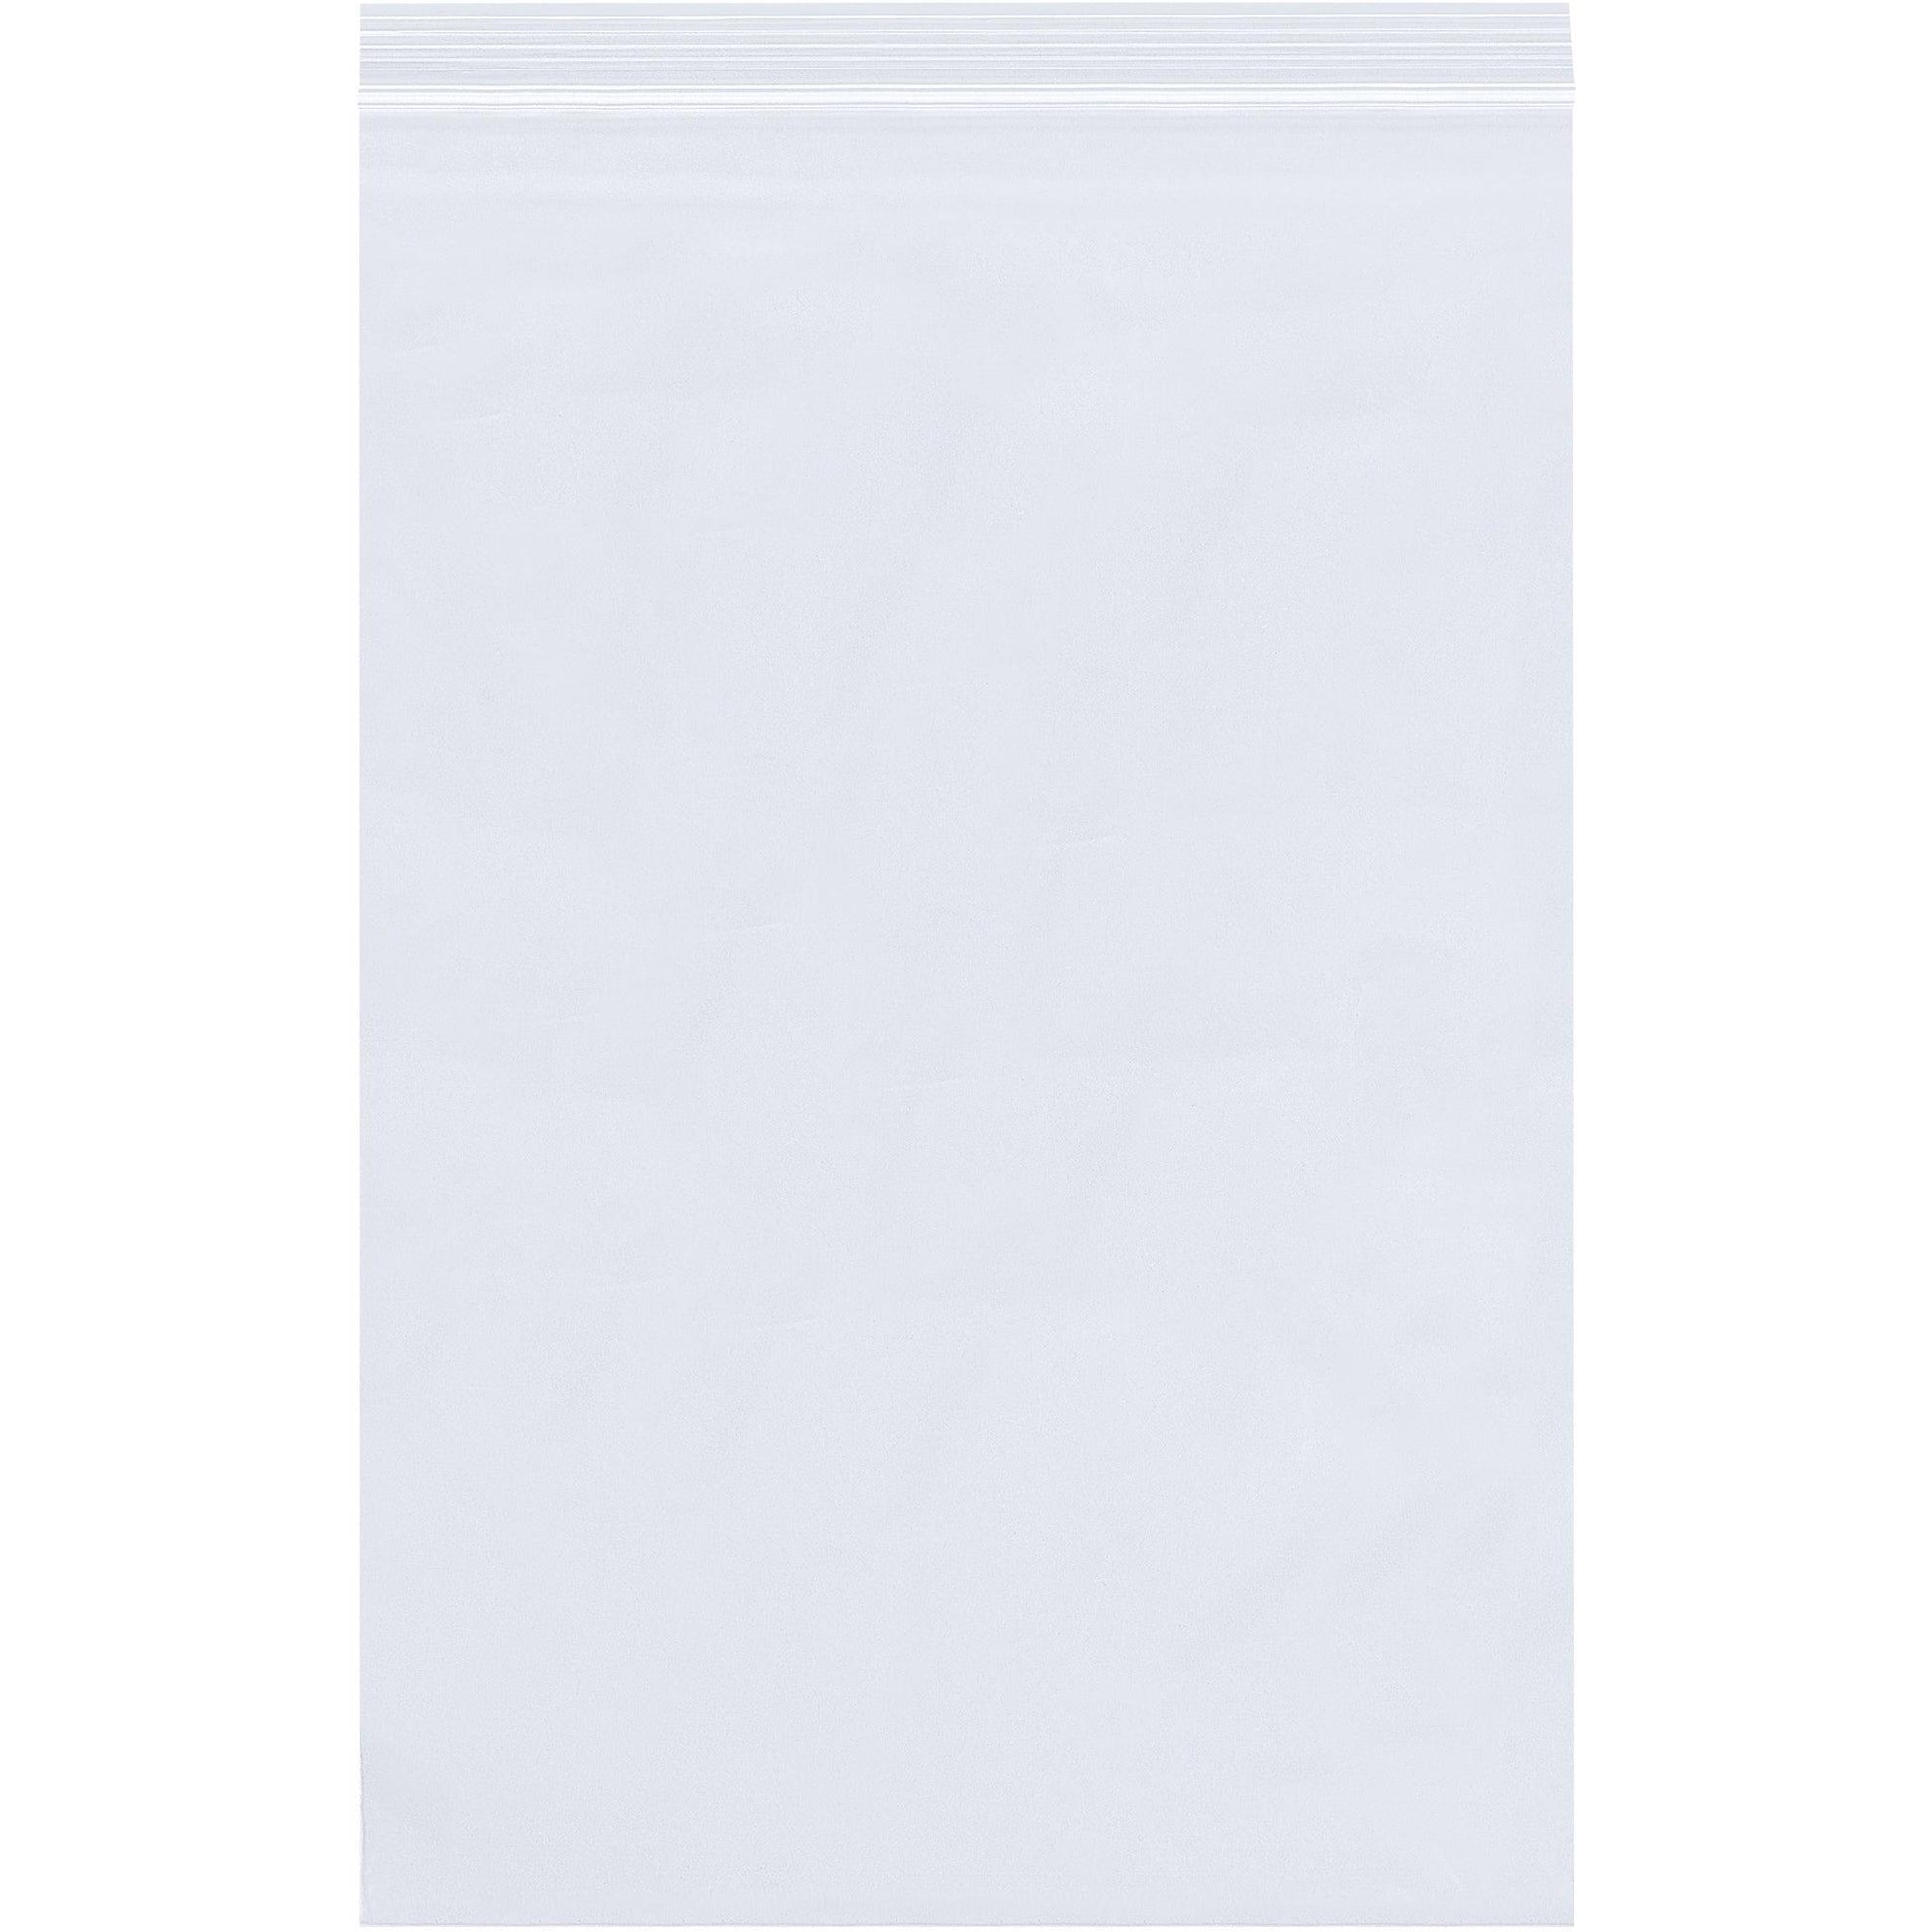 6 x 20" - 2 Mil Reclosable Poly Bags - PB3626